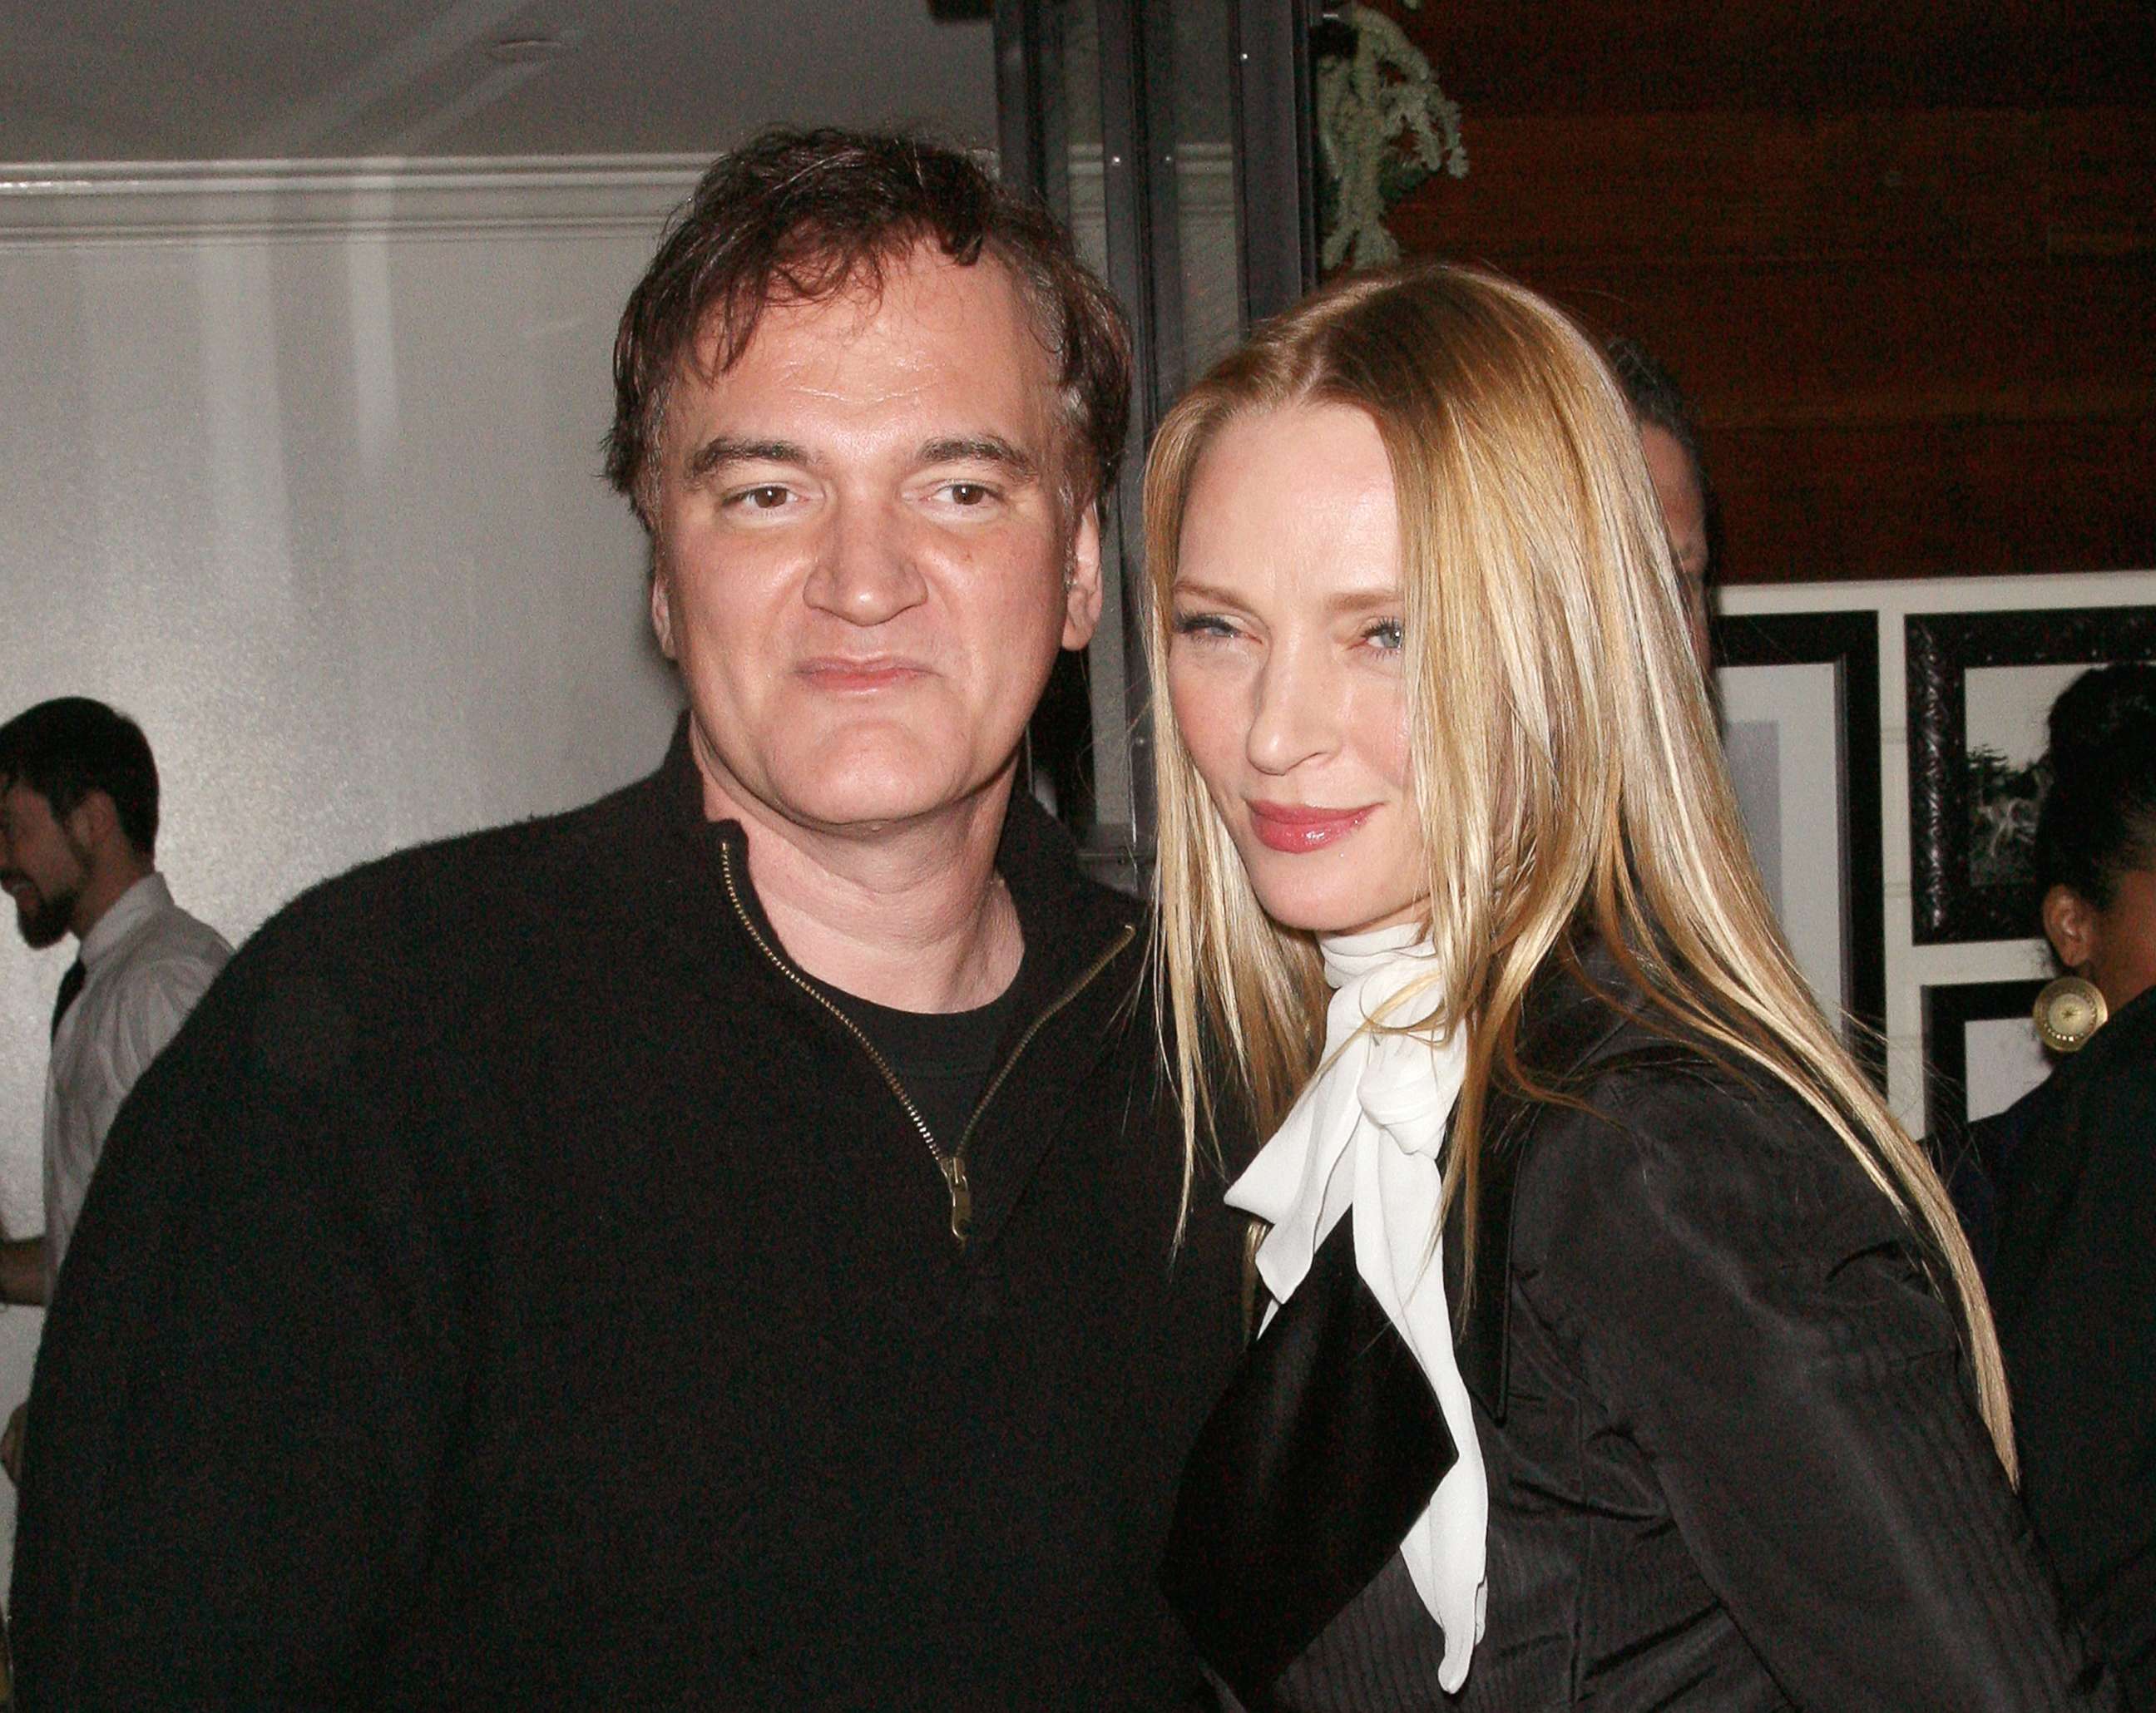 PHOTO: Quentin Tarantino and Uma Thurman attend an after-party for "Django Unchained" at The Standard Hotel, Dec. 11, 2012, in New York.